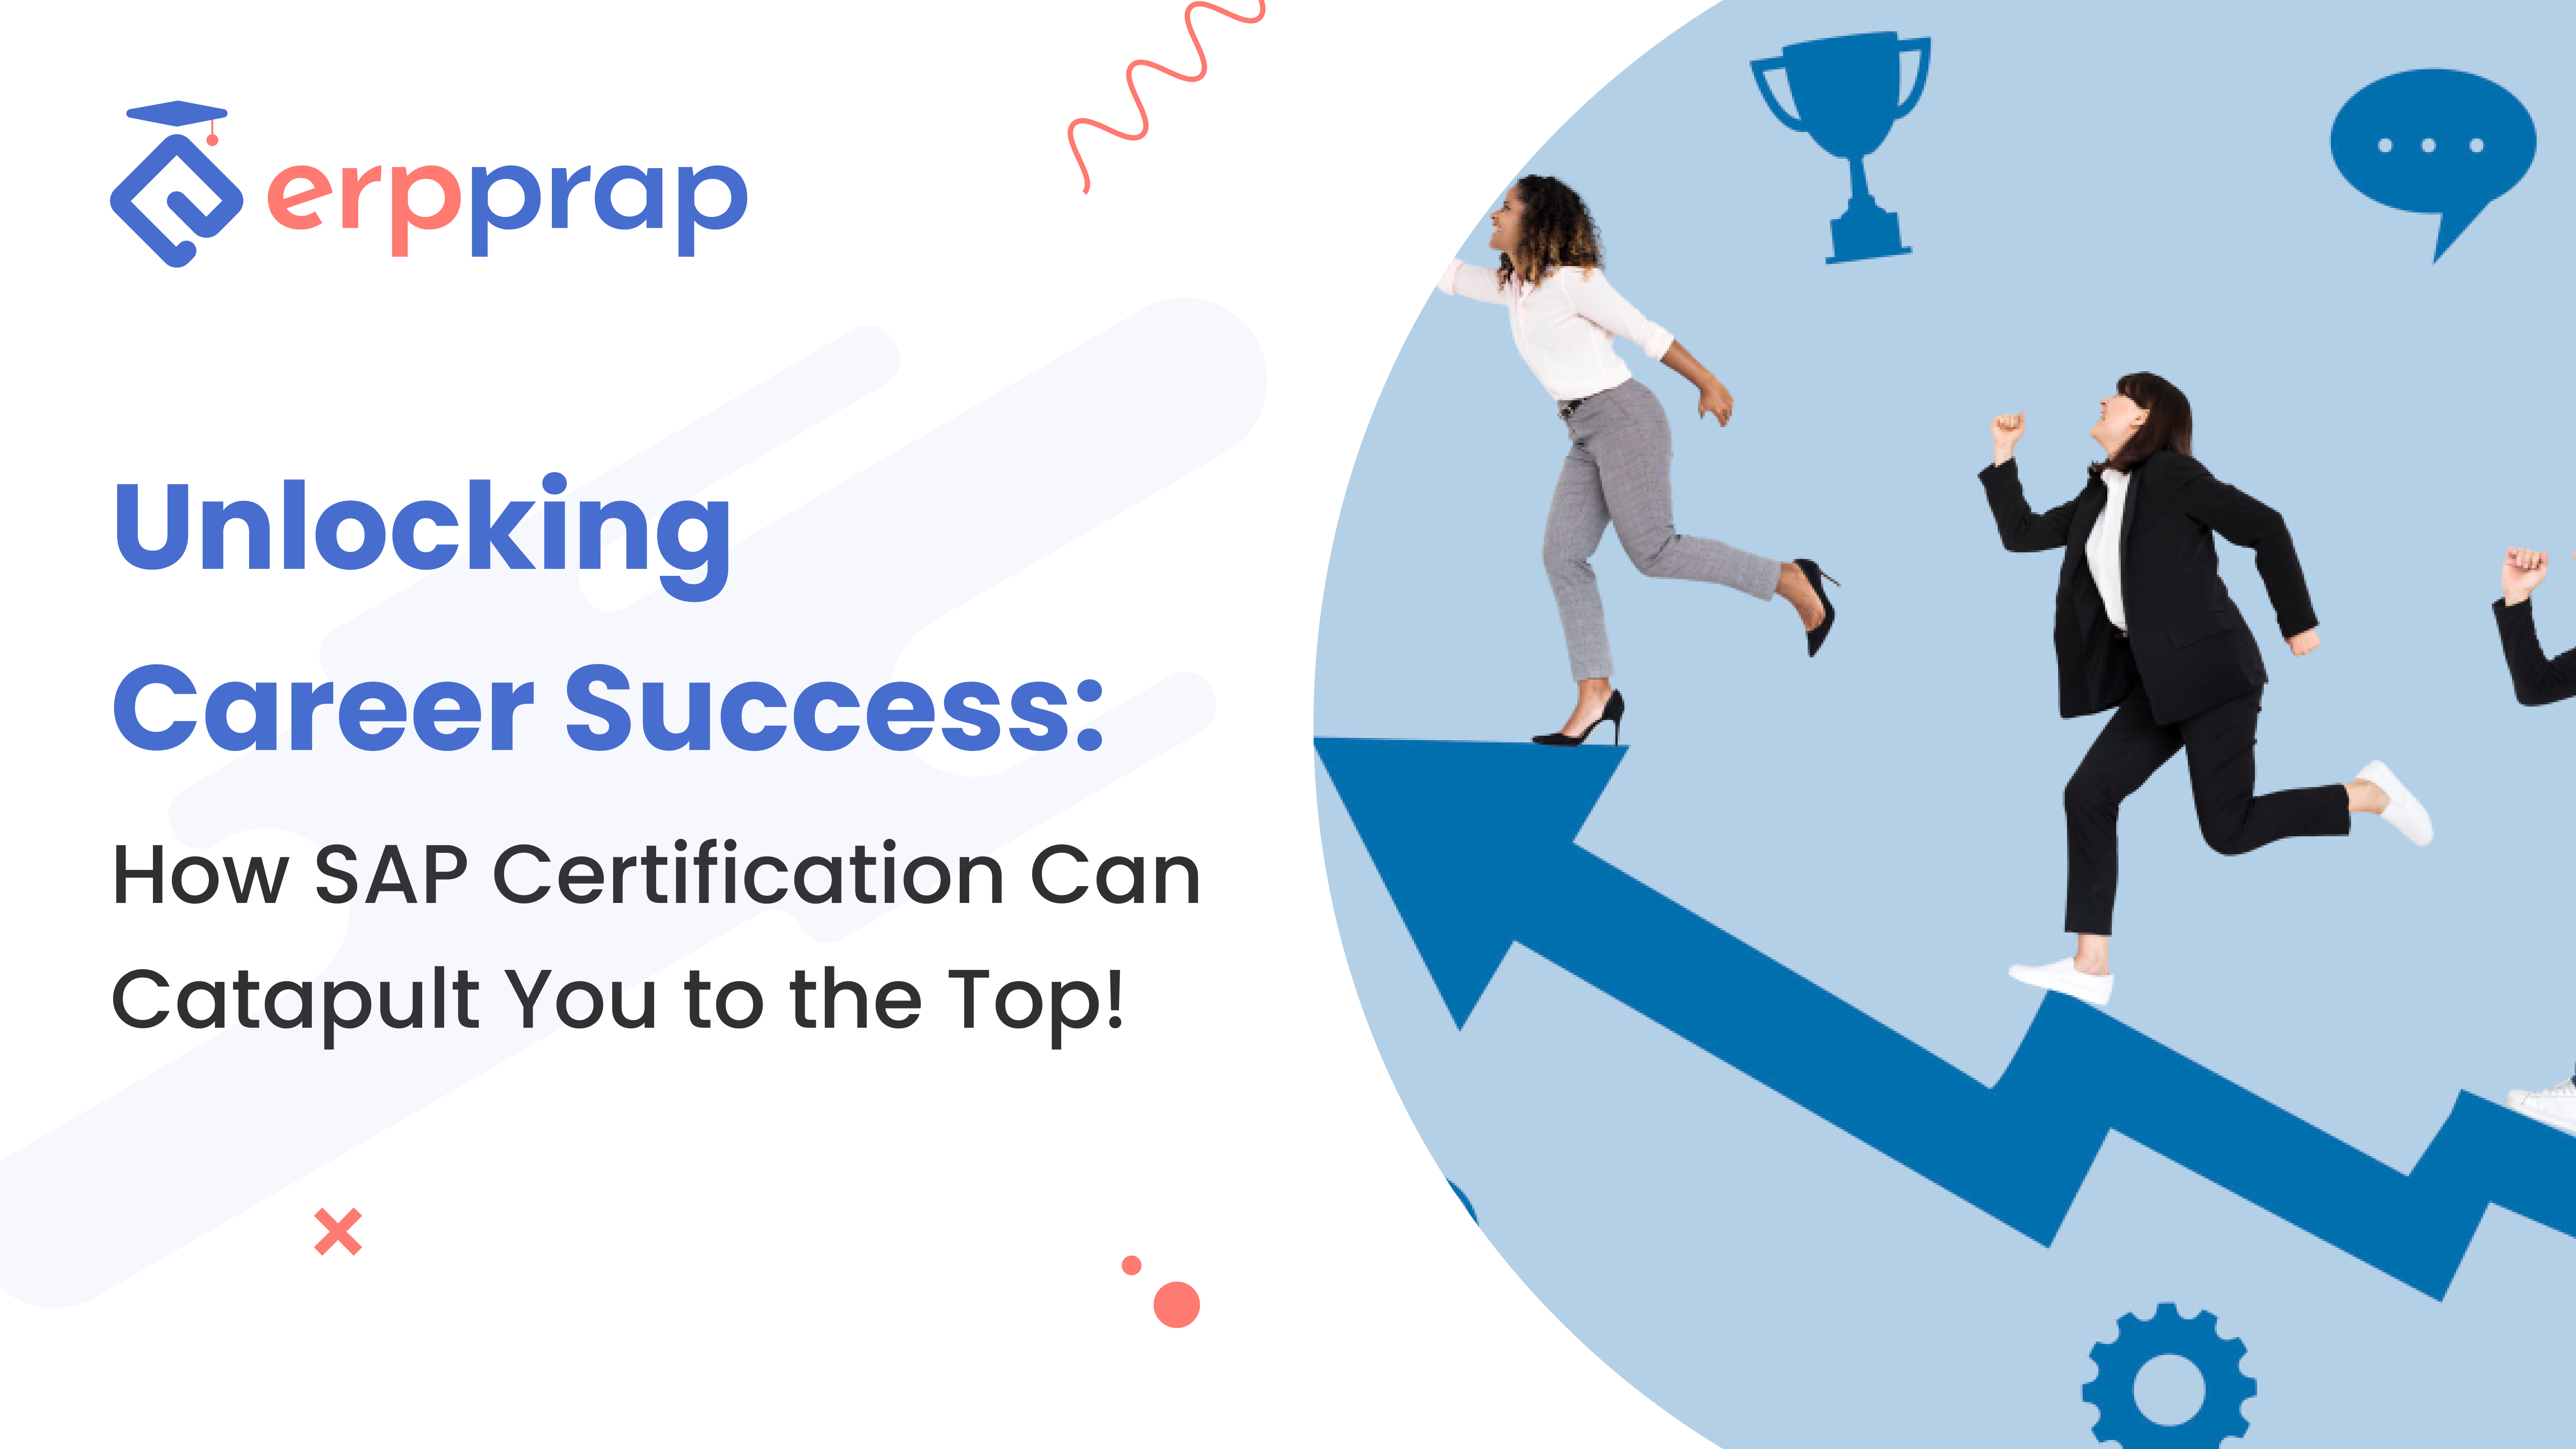 Unlocking Career Success: How SAP Certification Can Catapult You to the Top!